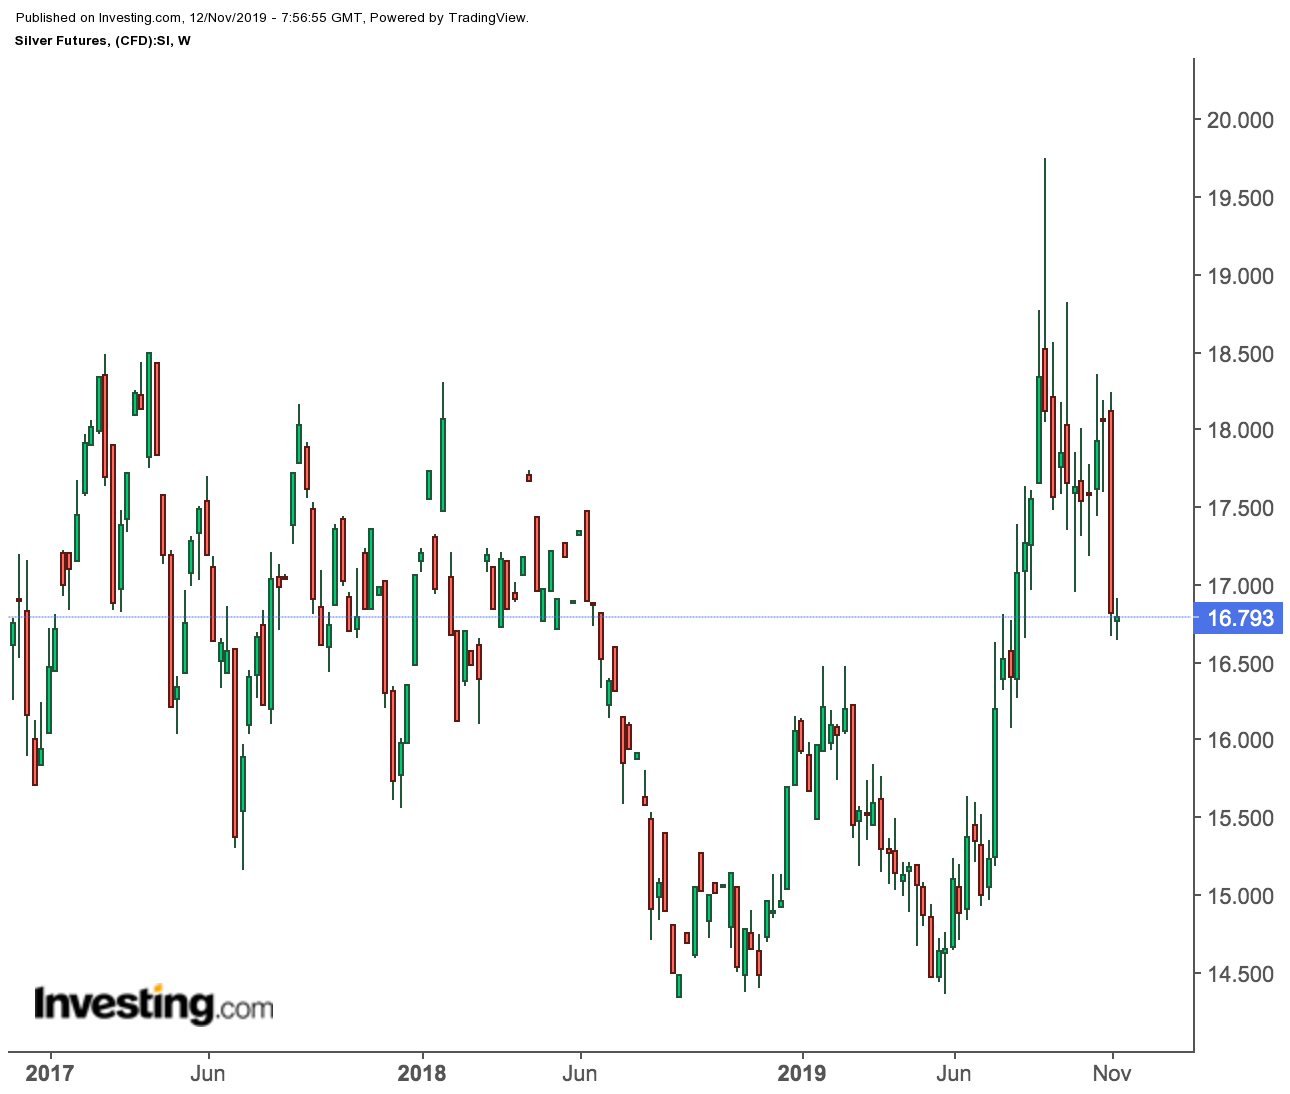 Silver Futures Weekly Price Chart